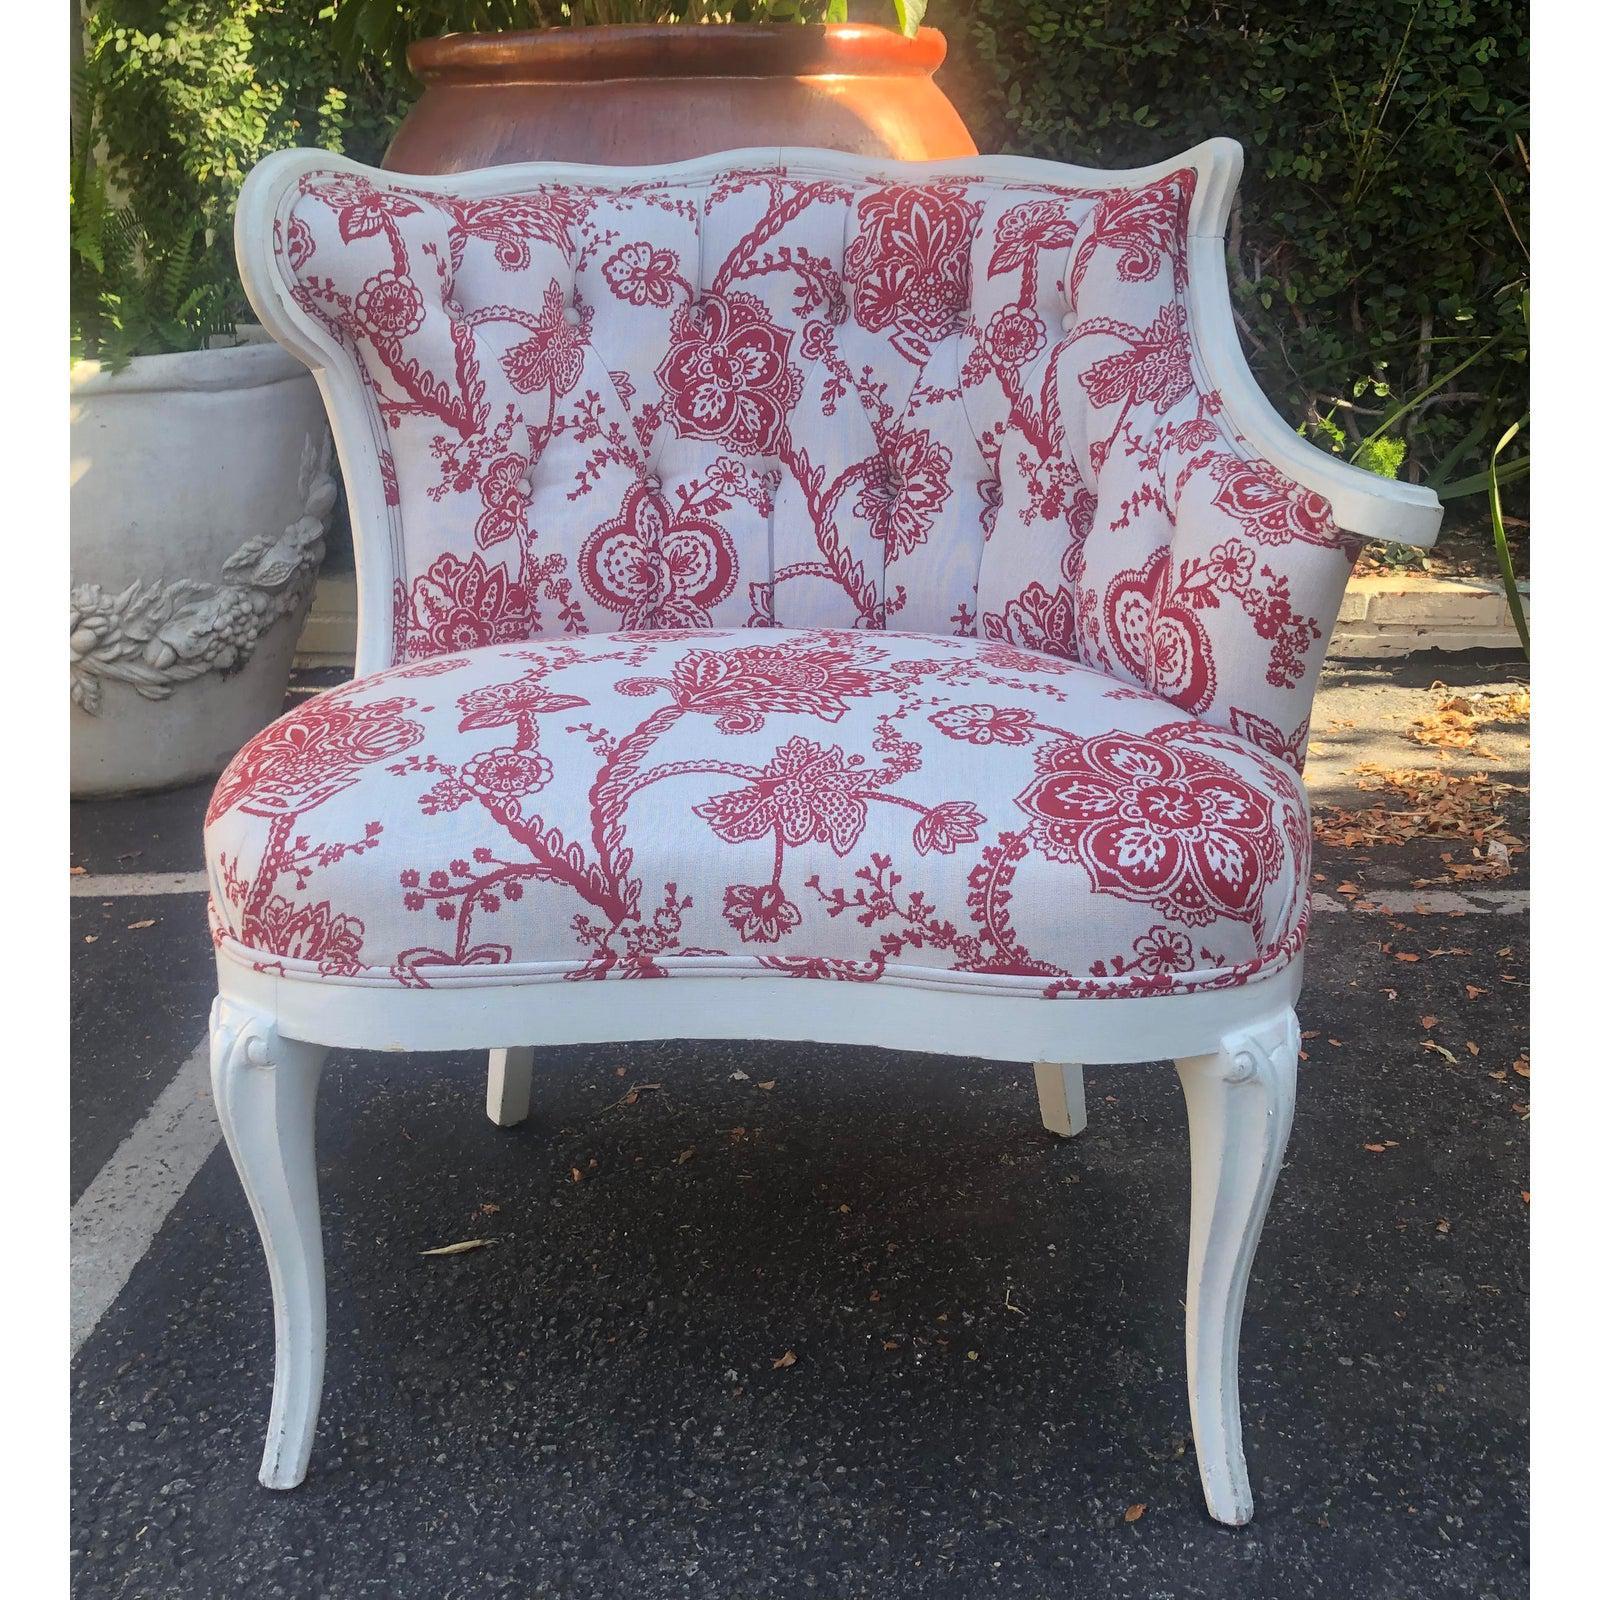 Grosfeld House Hollywood Regency Style Paint Decorated Club Chair

Additional information:
Materials: Paint
Color: Red
Brand: Grosfeld House
Designer: Grosfeld House
Period: 1950s
Styles: Hollywood Regency
Number of Seats: 1
Item Type: